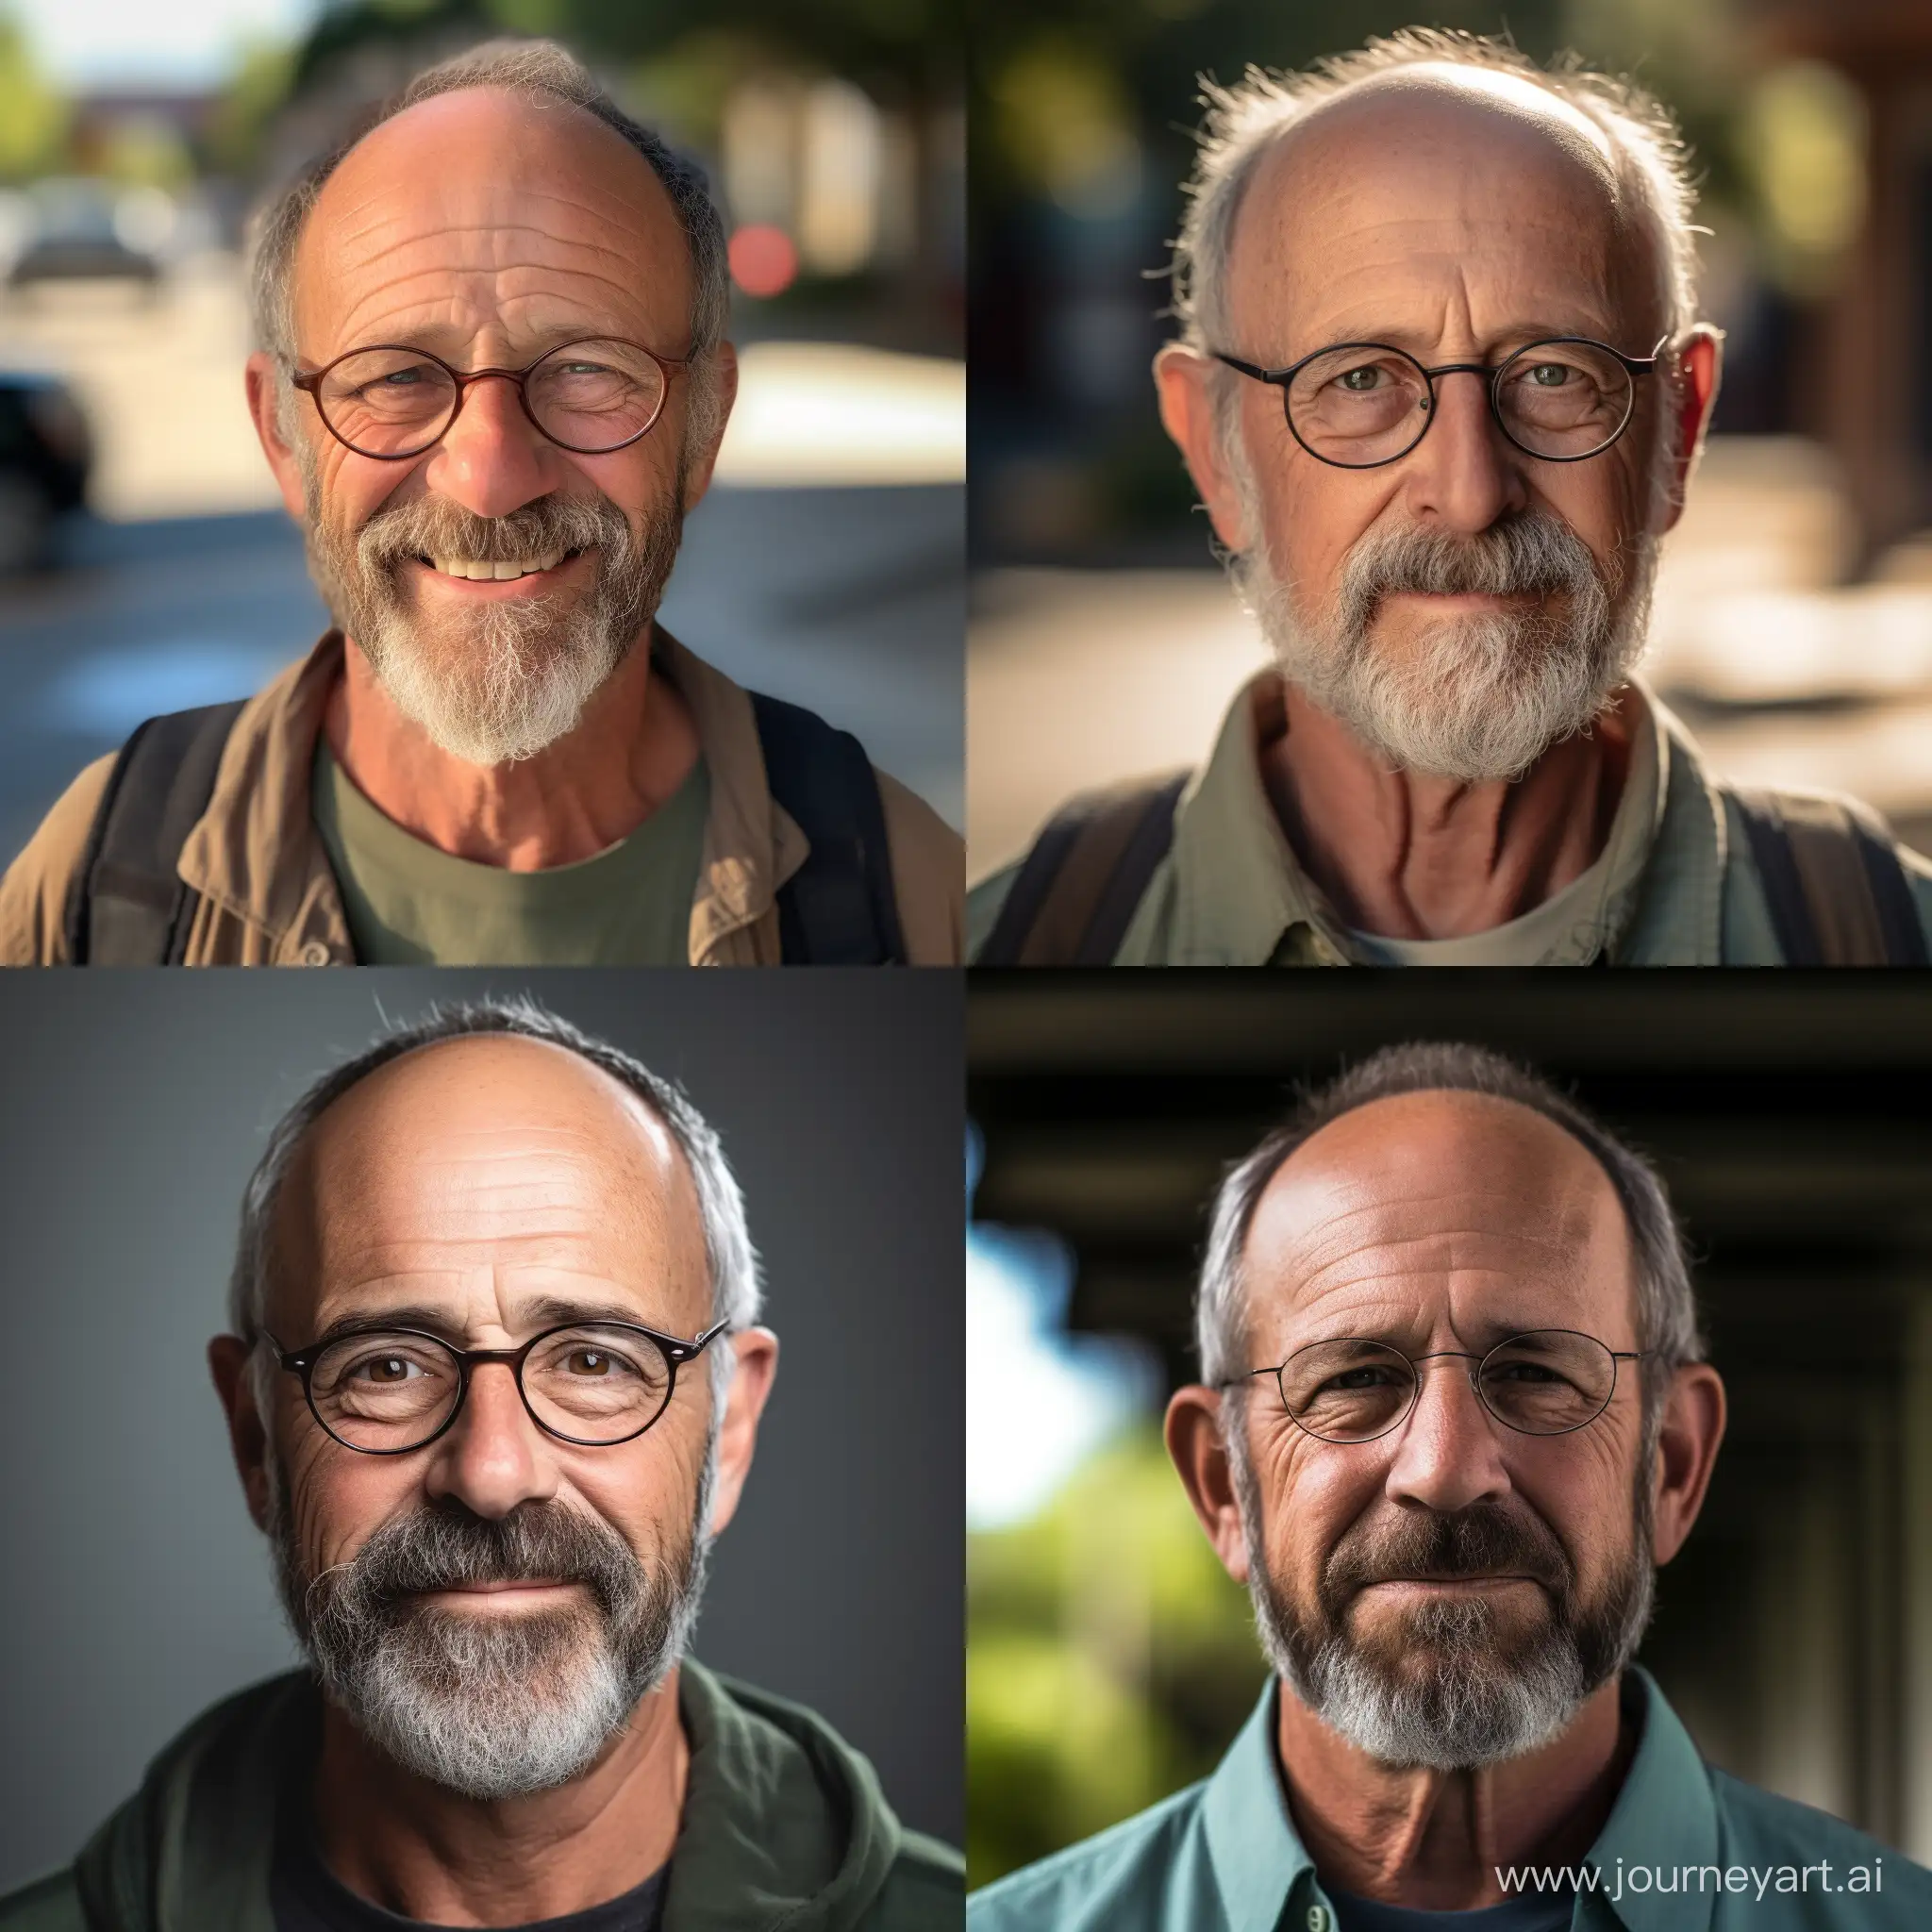 Elderly-Visionary-in-Green-Glasses-Portrait-of-a-Balding-Man-with-Gray-Beard-and-Mustache